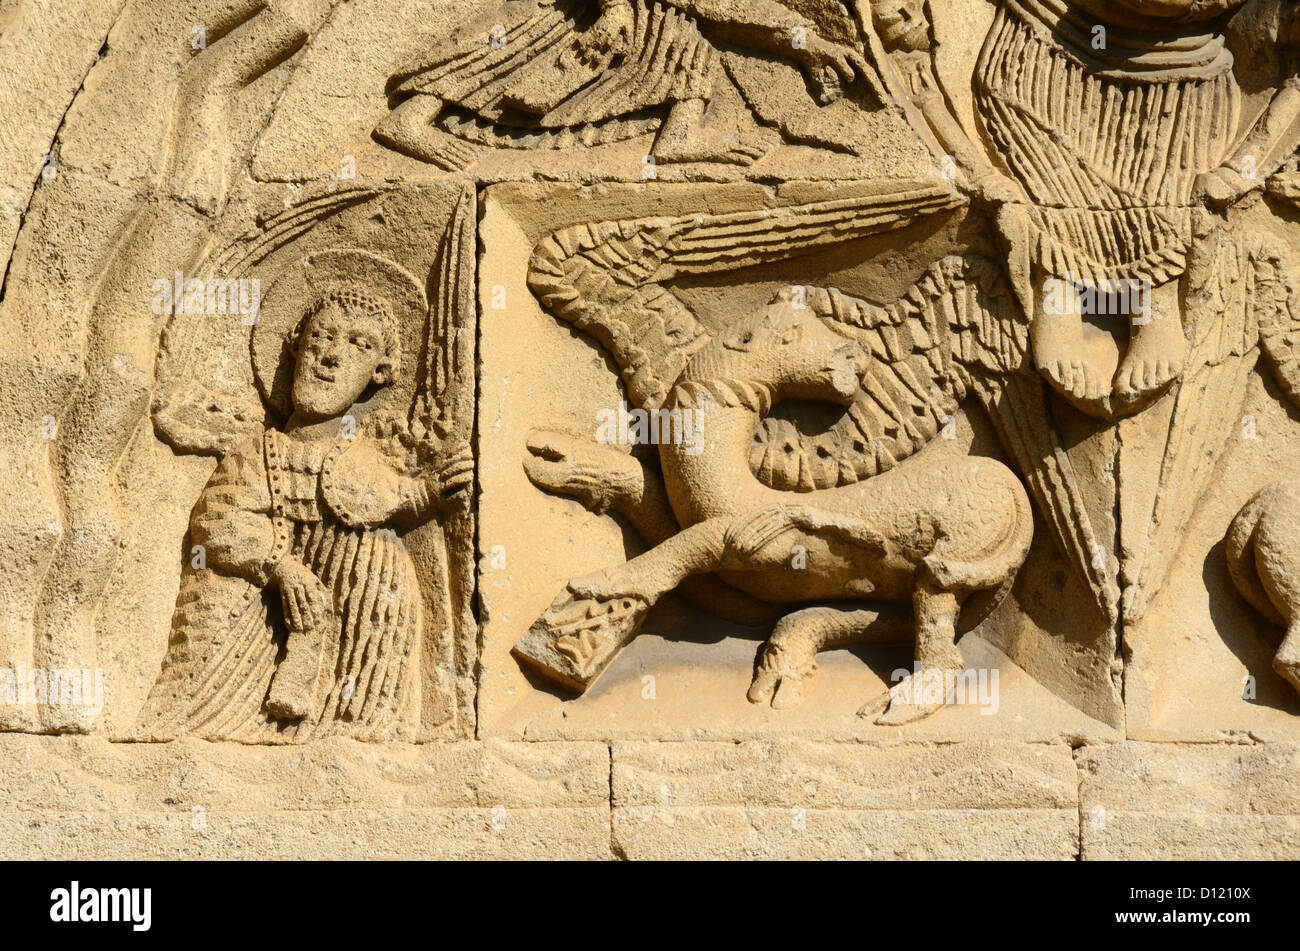 Stone Carving of Dragon on c12th Church of Our Lady Facade of Ganagobie Abbey or Ganagobie Monastery Alpes-de-Haute-Provence Provence France Stock Photo